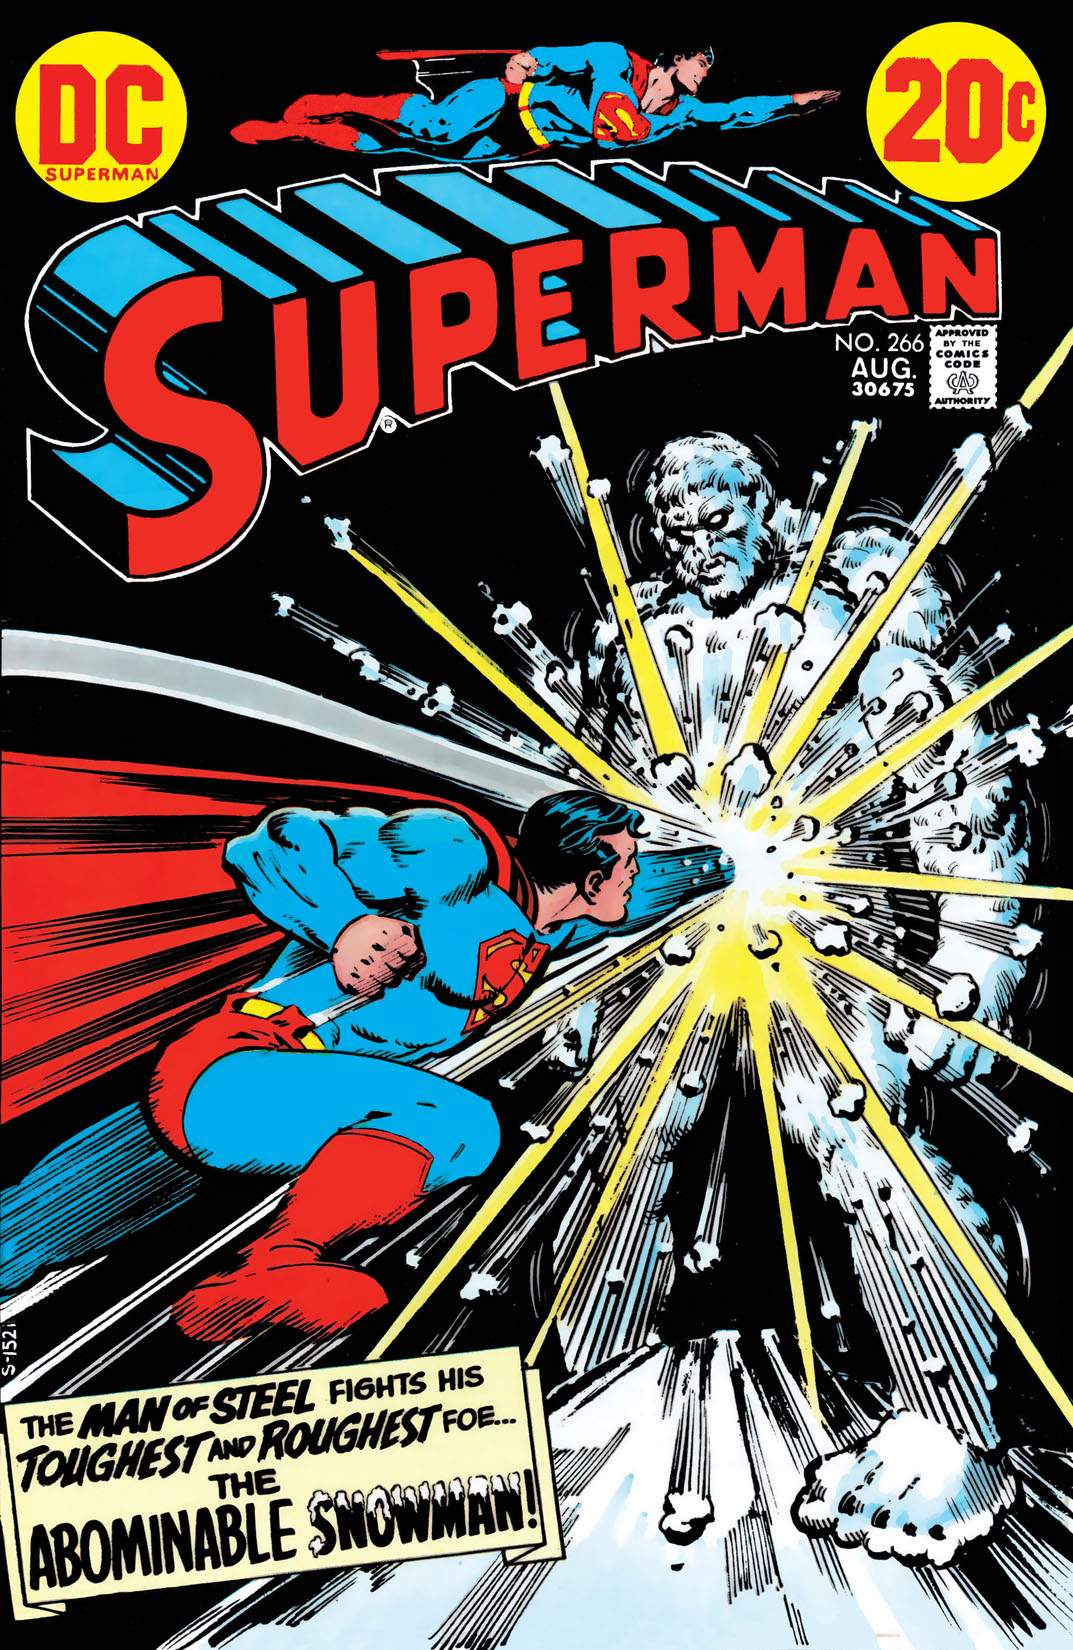 Superman (1939-) #266 preview images